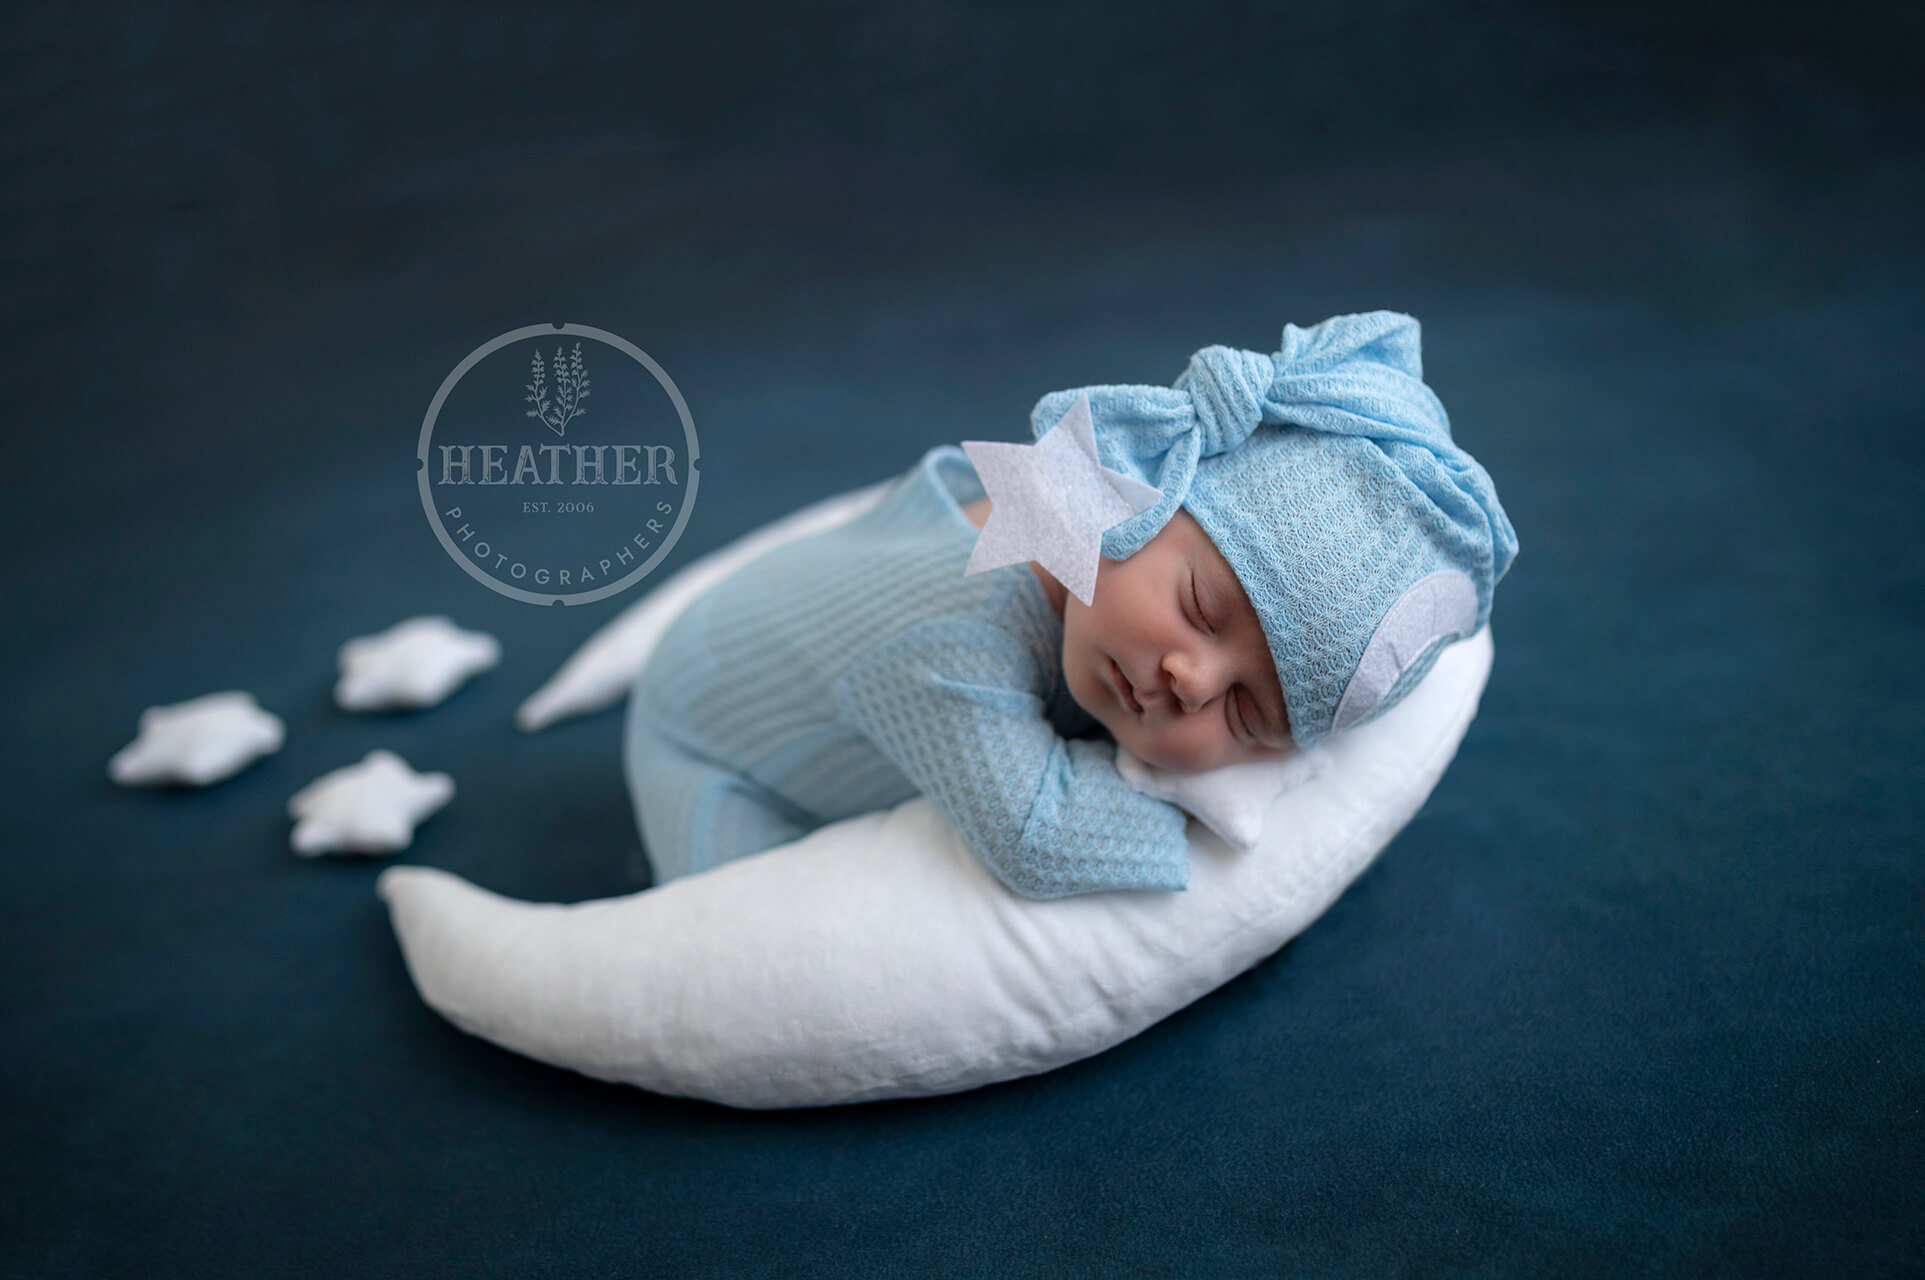 Blue is a timeless choice for baby photography, representing both boys and girls